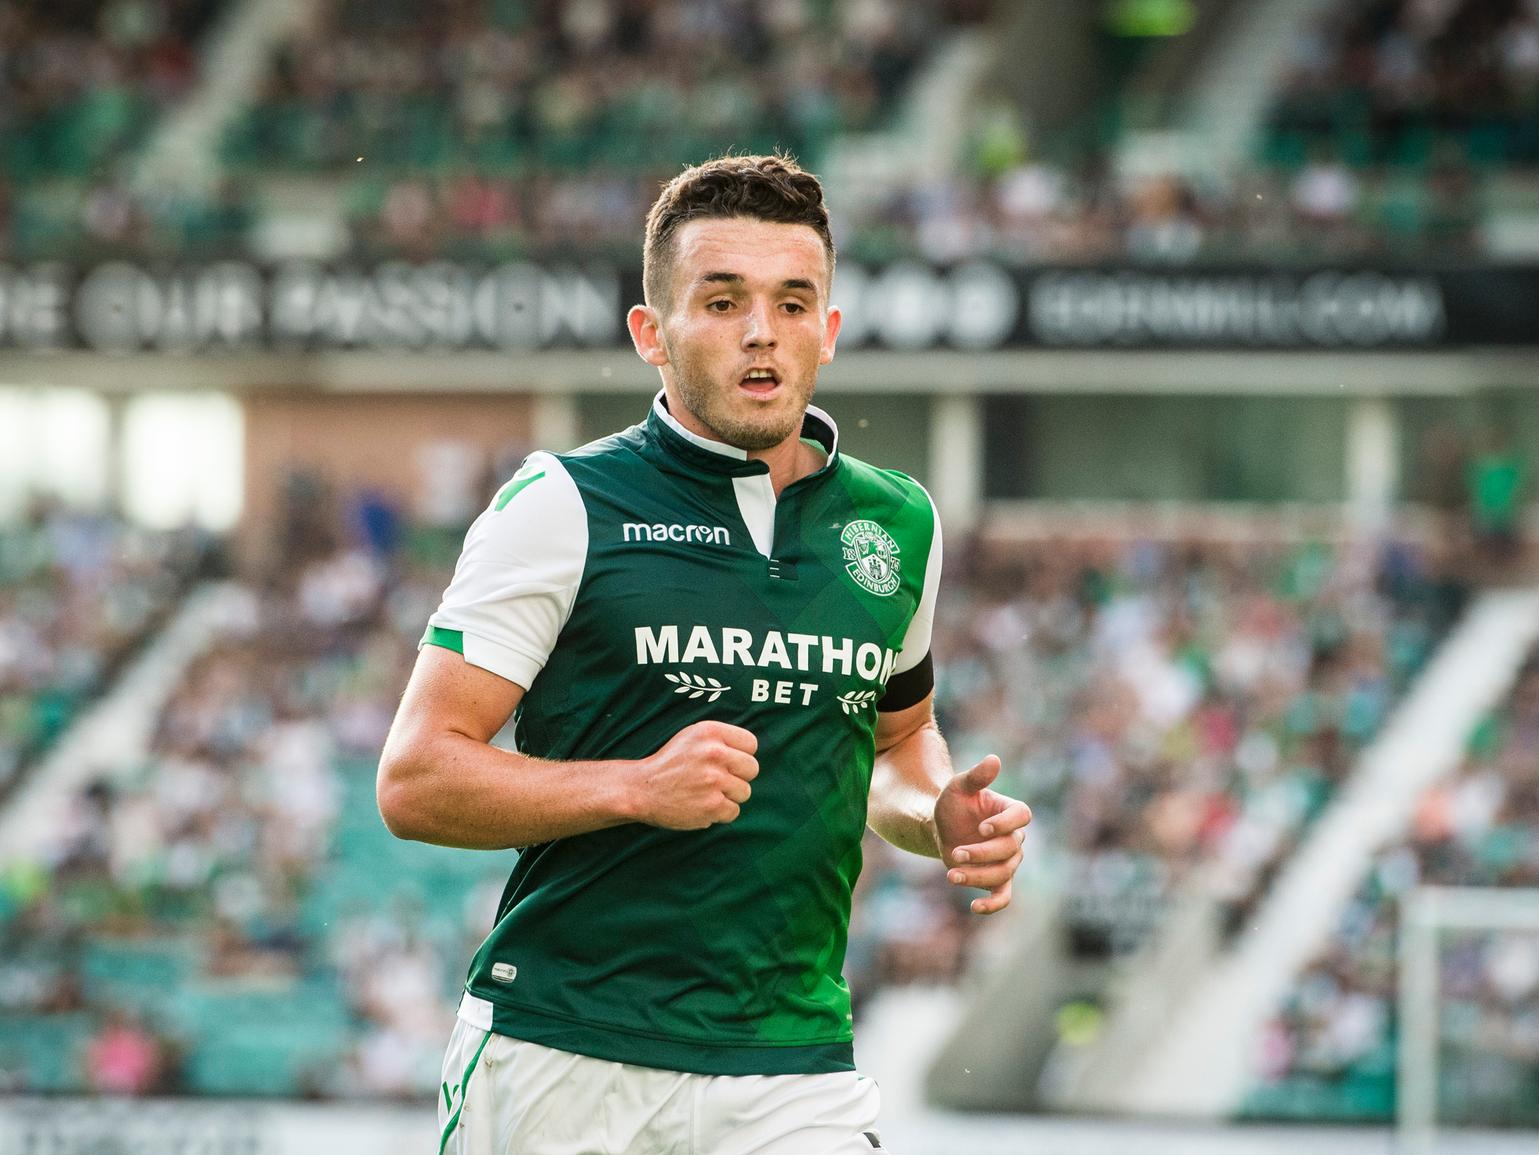 What a midfield this is! Playing alongside Brown and Henderson is McGinn, who was the subject of a rumoured 50-million-pound bid from Manchester United earlier this year. Aston Villa fans insist he's worth more.